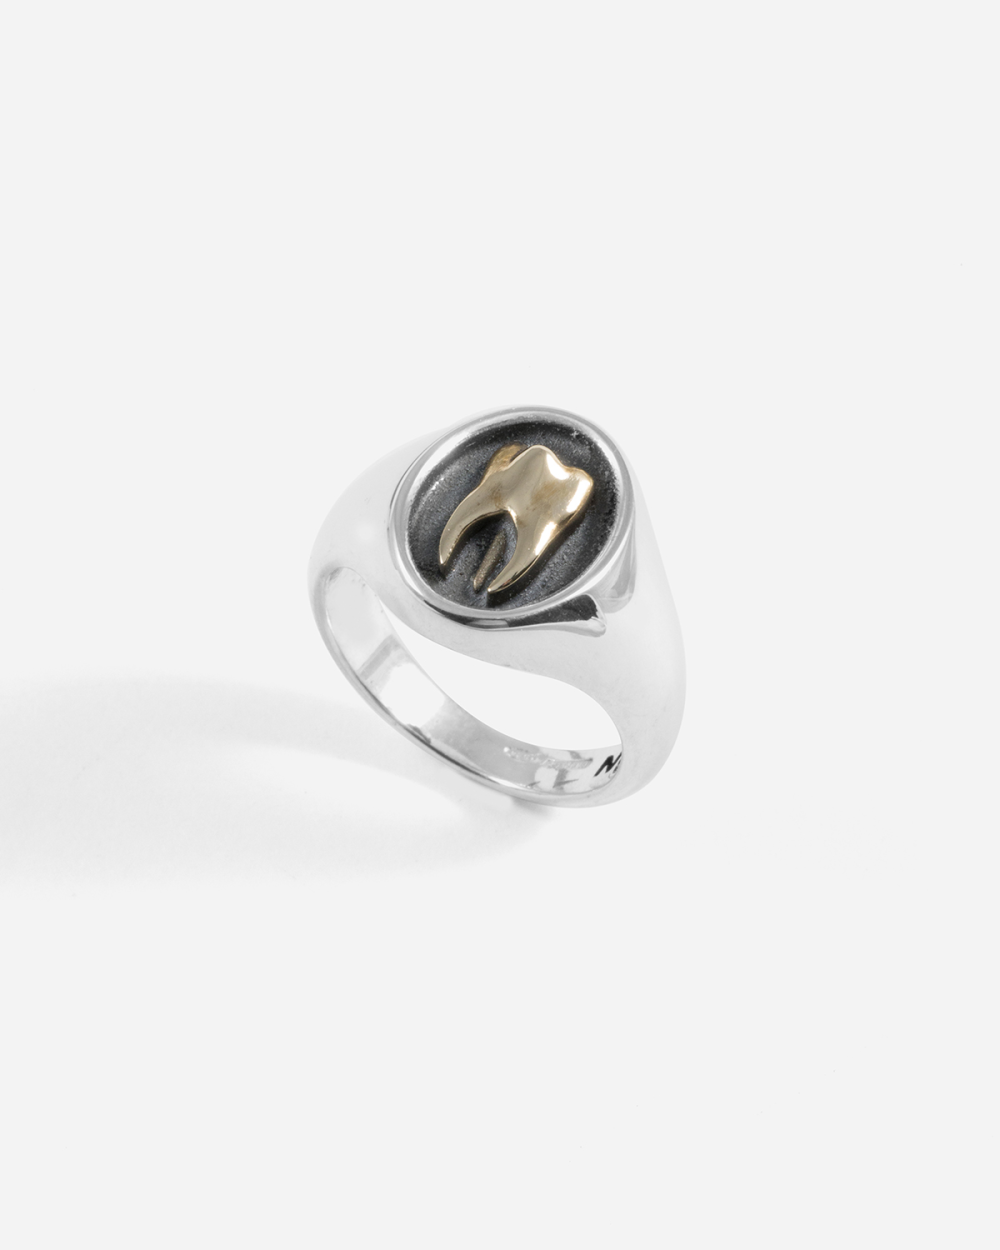 TRADITIONAL TOOTH SIGNET RING